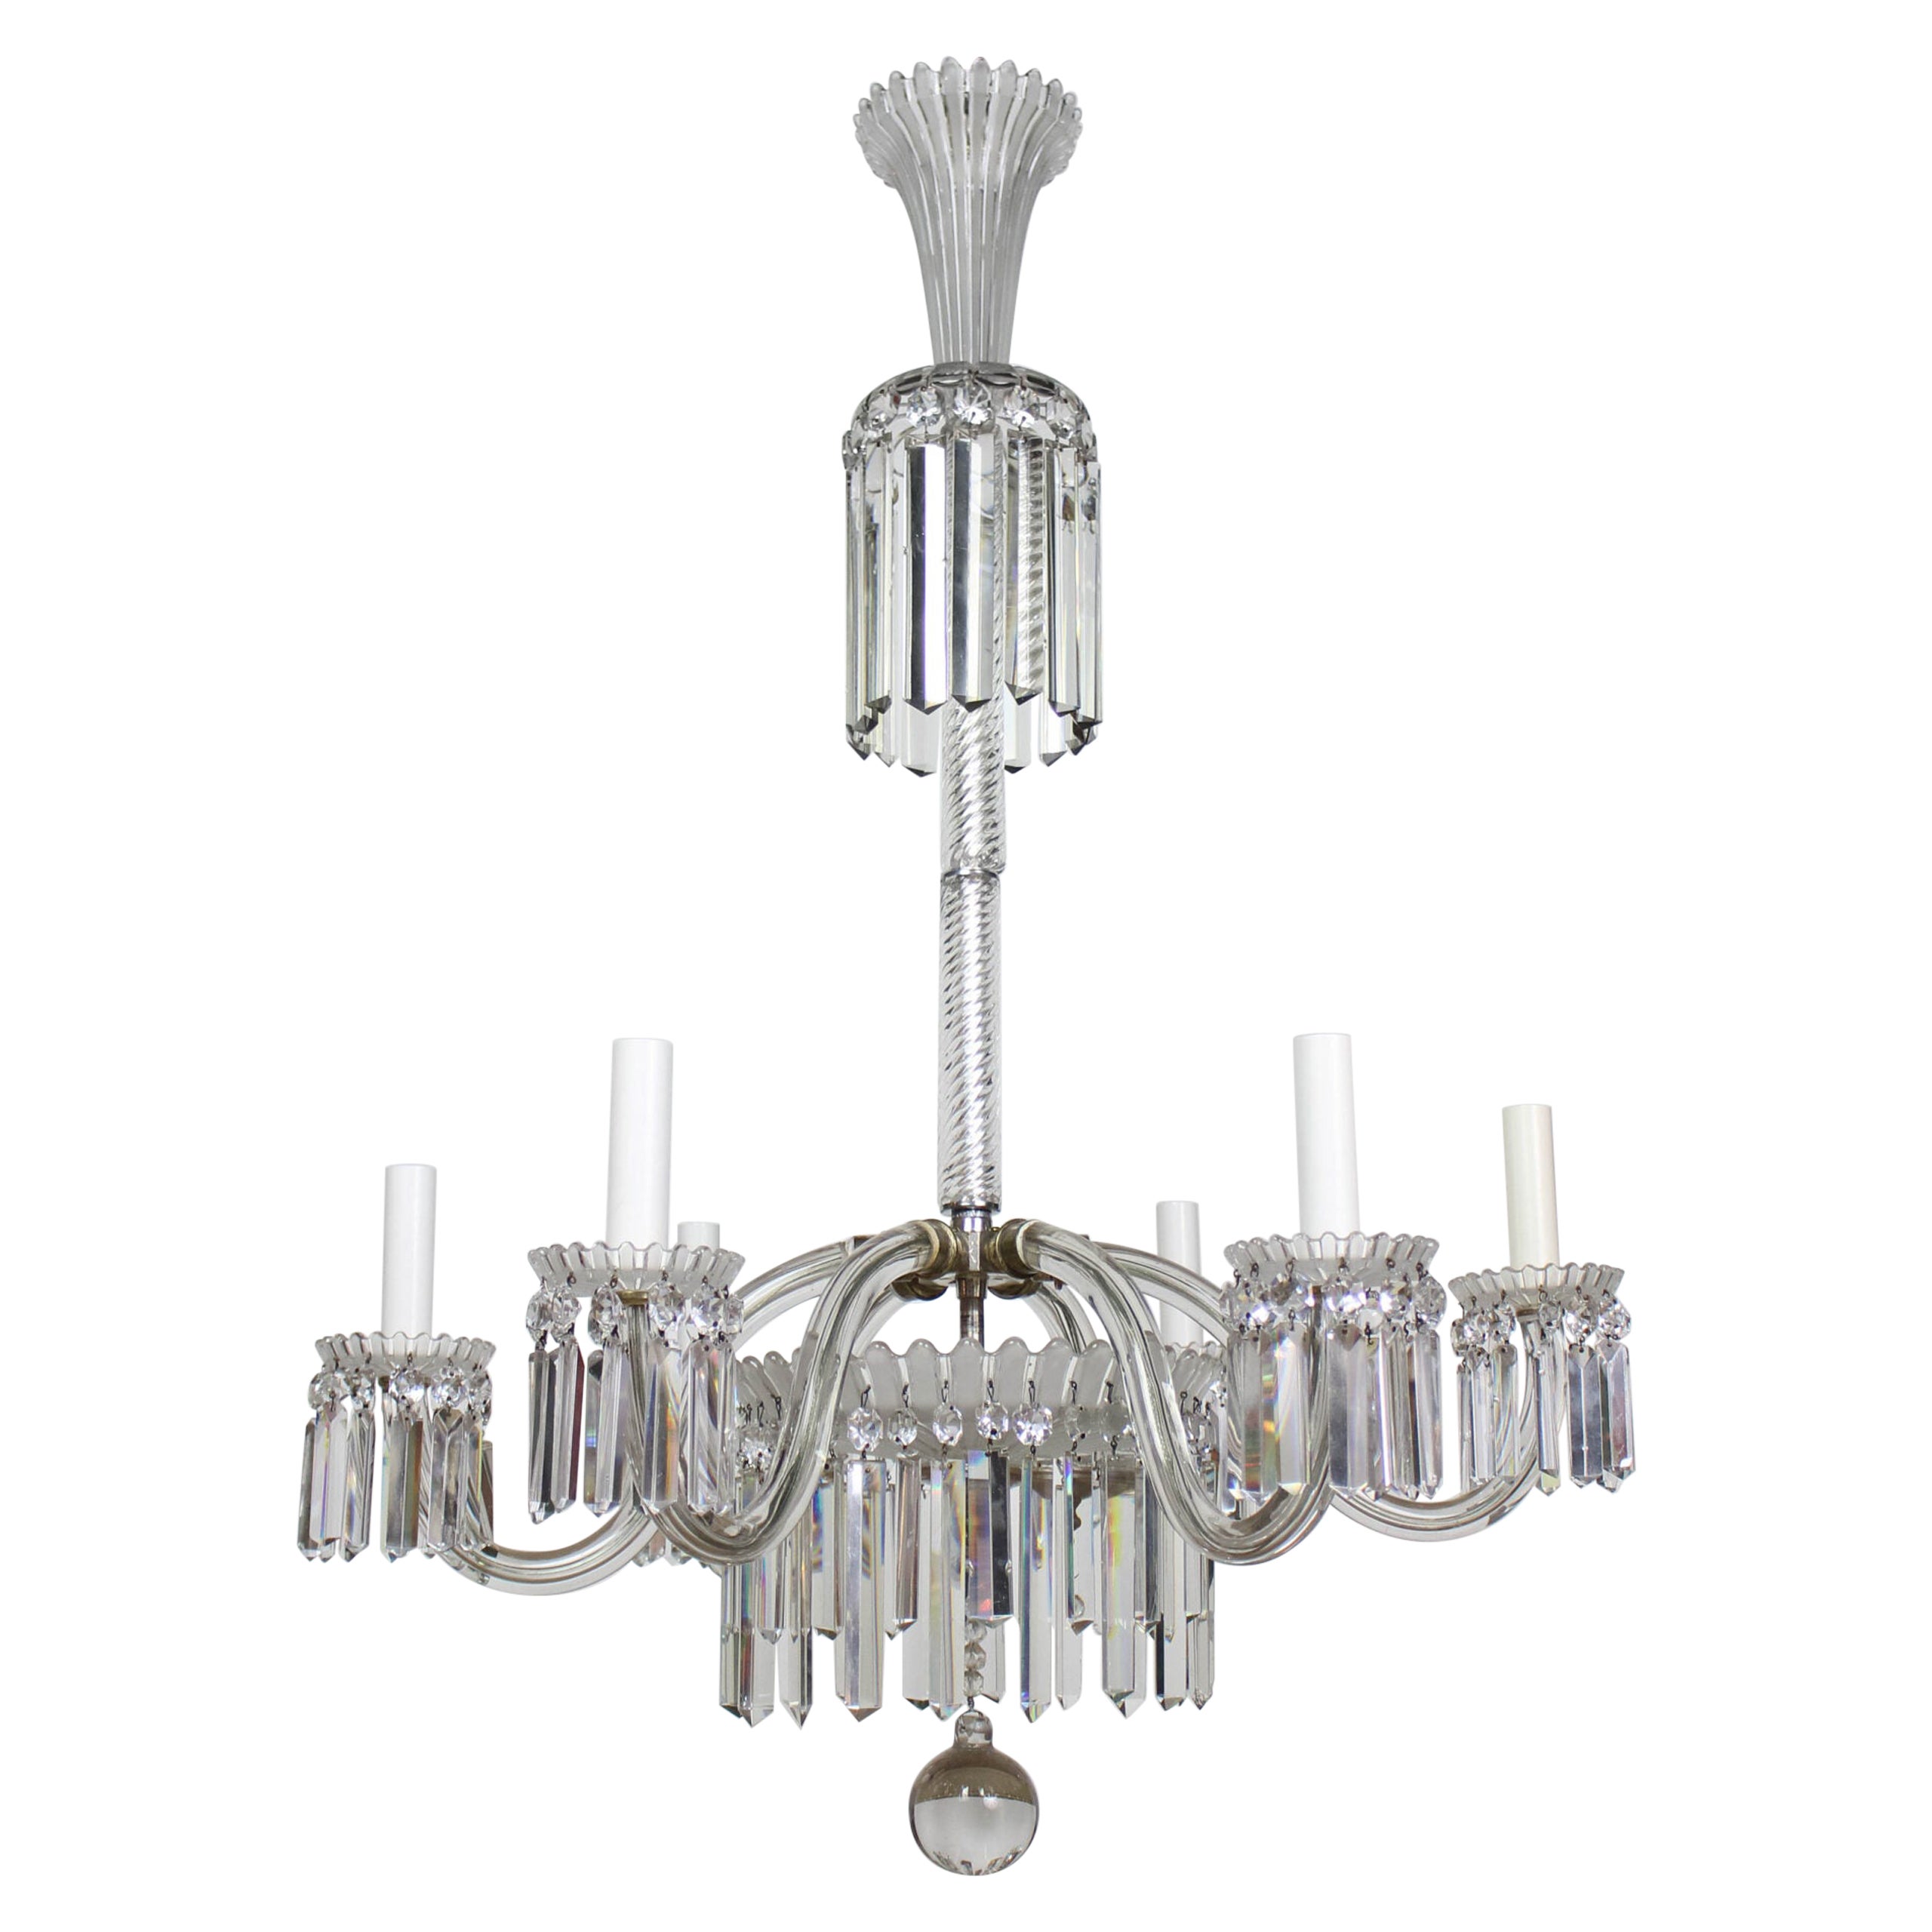 19th Century Restored Crystal Baccarat Chandelier For Sale